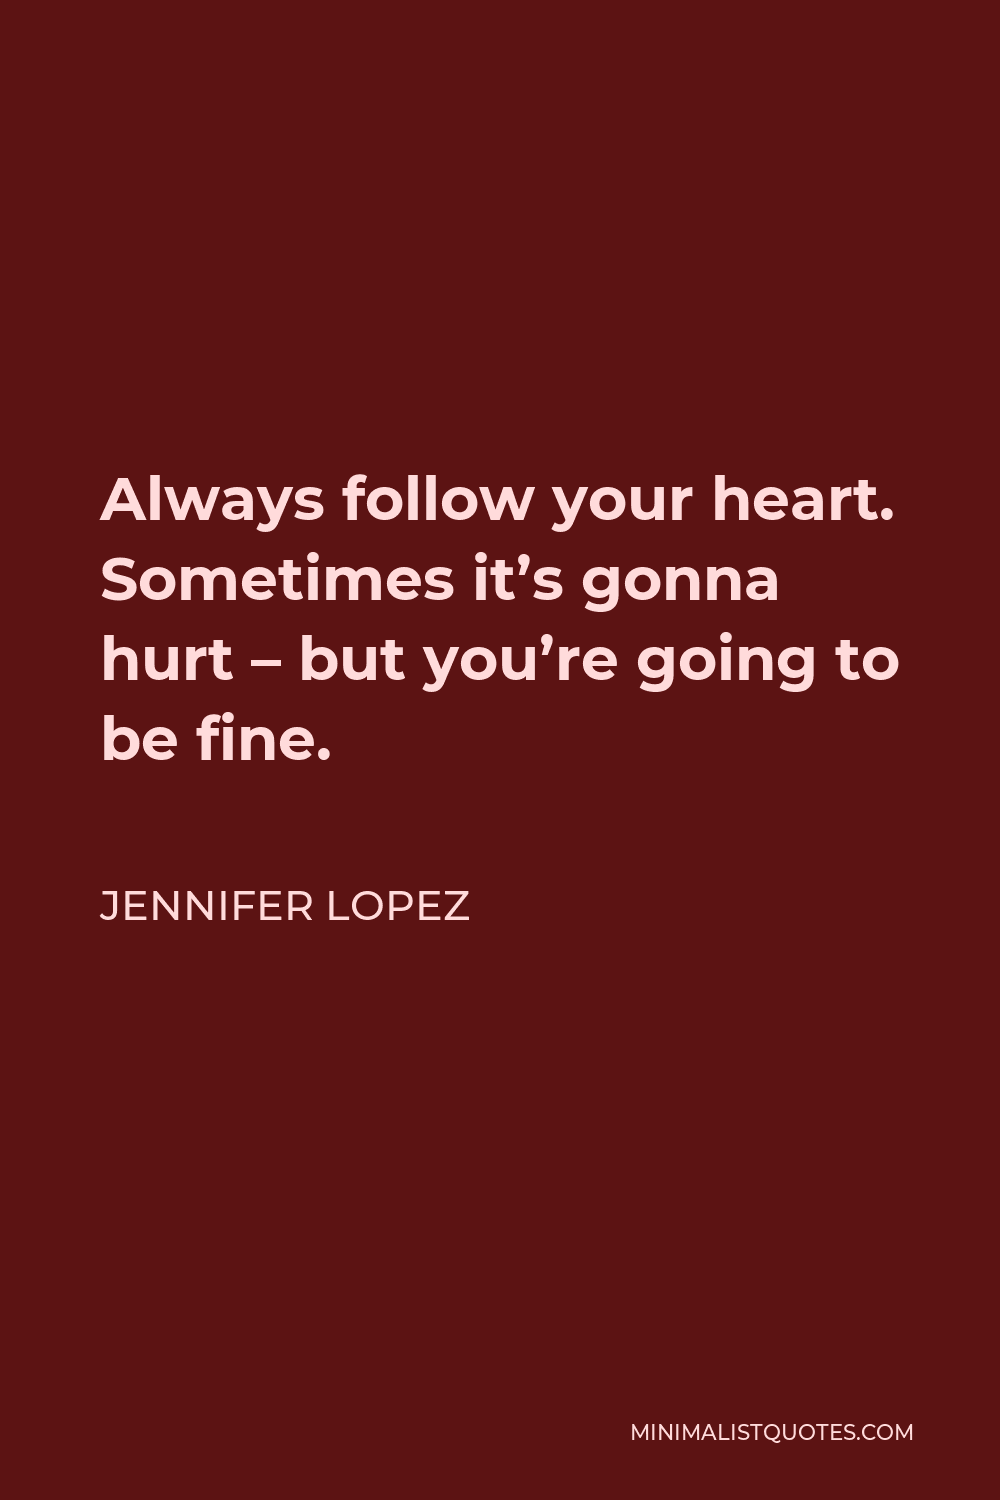 Jennifer Lopez Quote - Always follow your heart. Sometimes it’s gonna hurt – but you’re going to be fine.